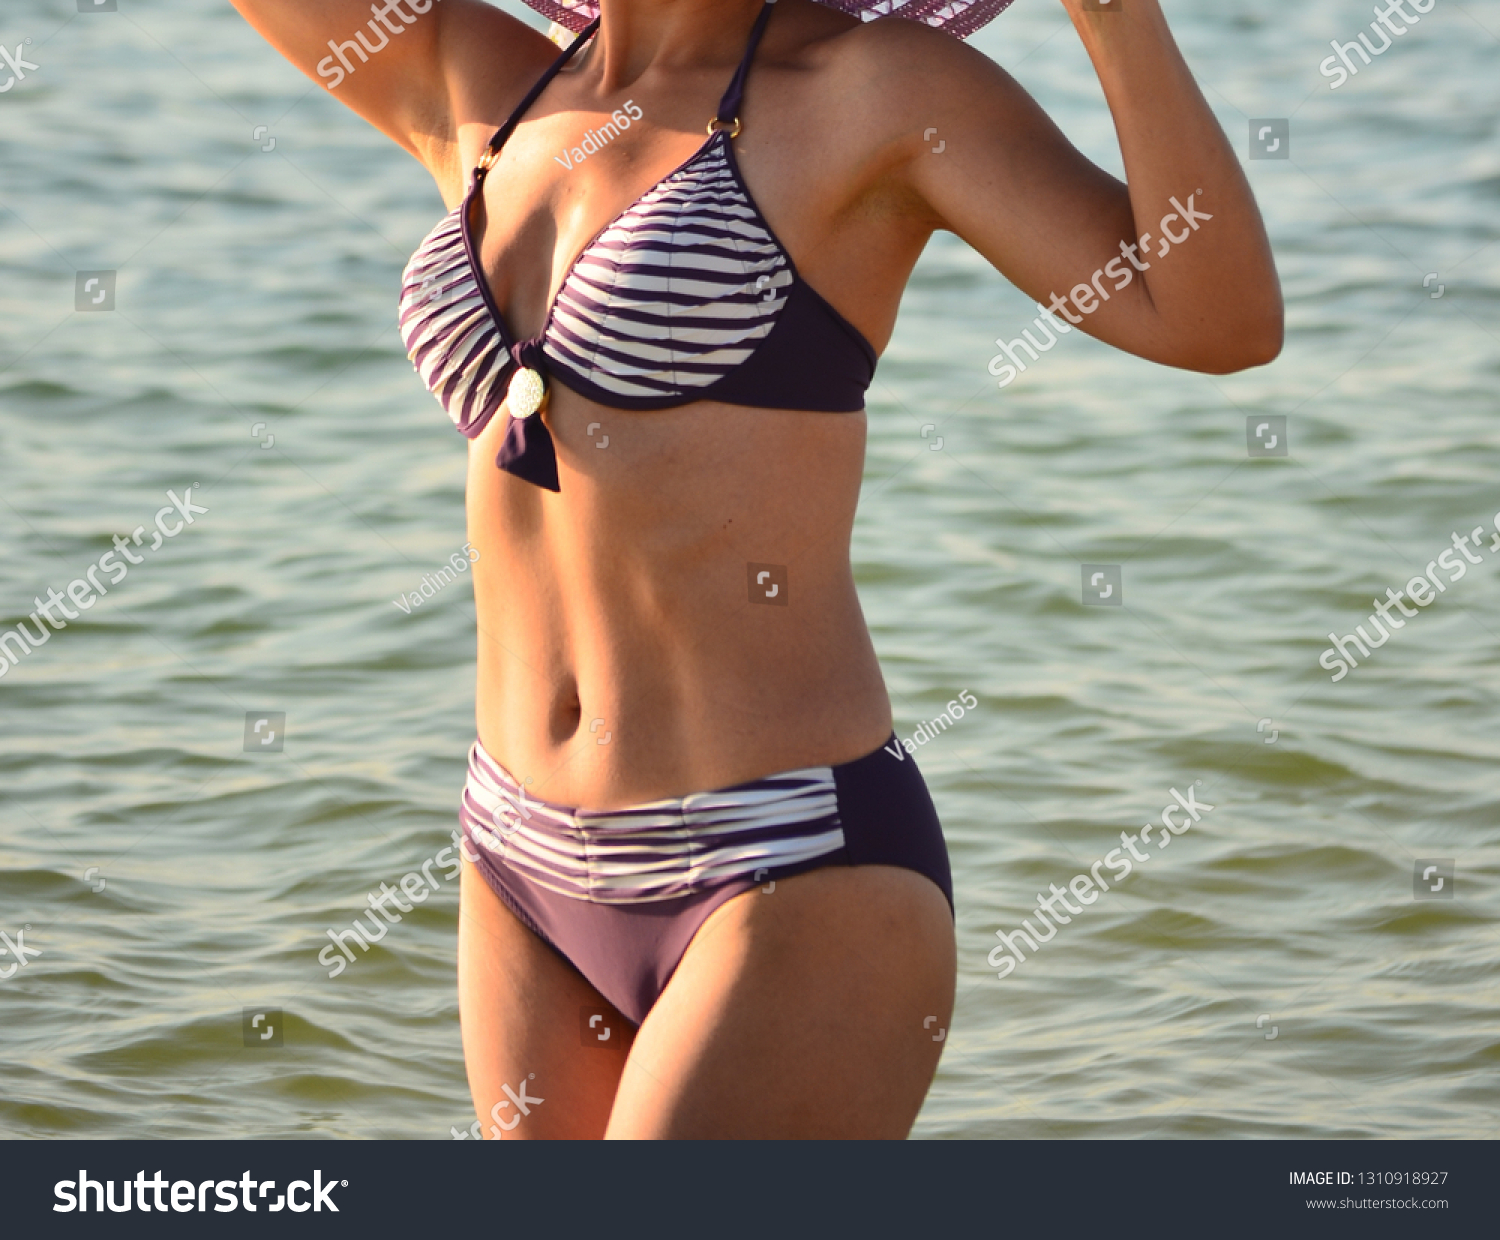 A woman in a gray swimsuit is standing near the sea and posing for a photo shoot #1310918927